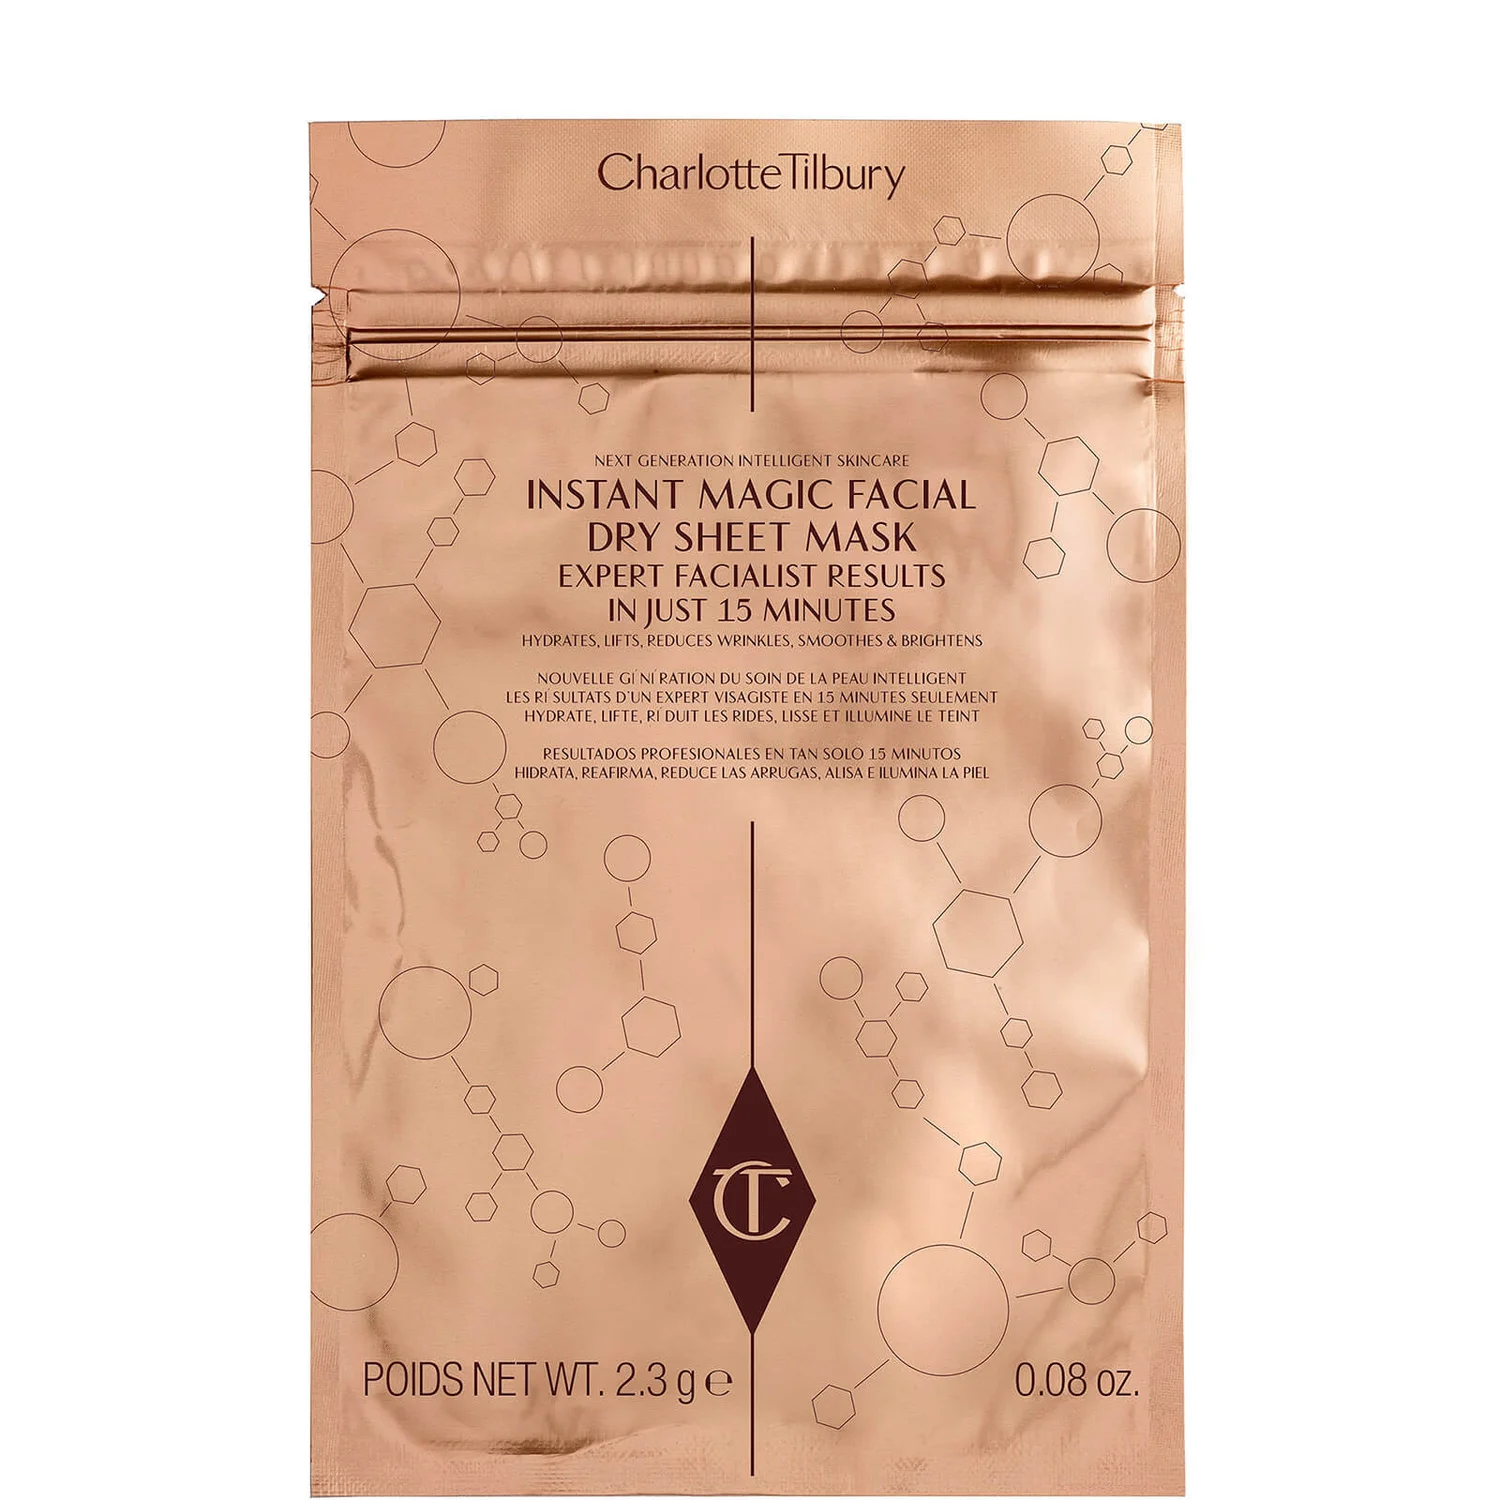 Charlotte Tilbury Instant Magic Facial Dry Sheet Mask best waterless skincare products UK